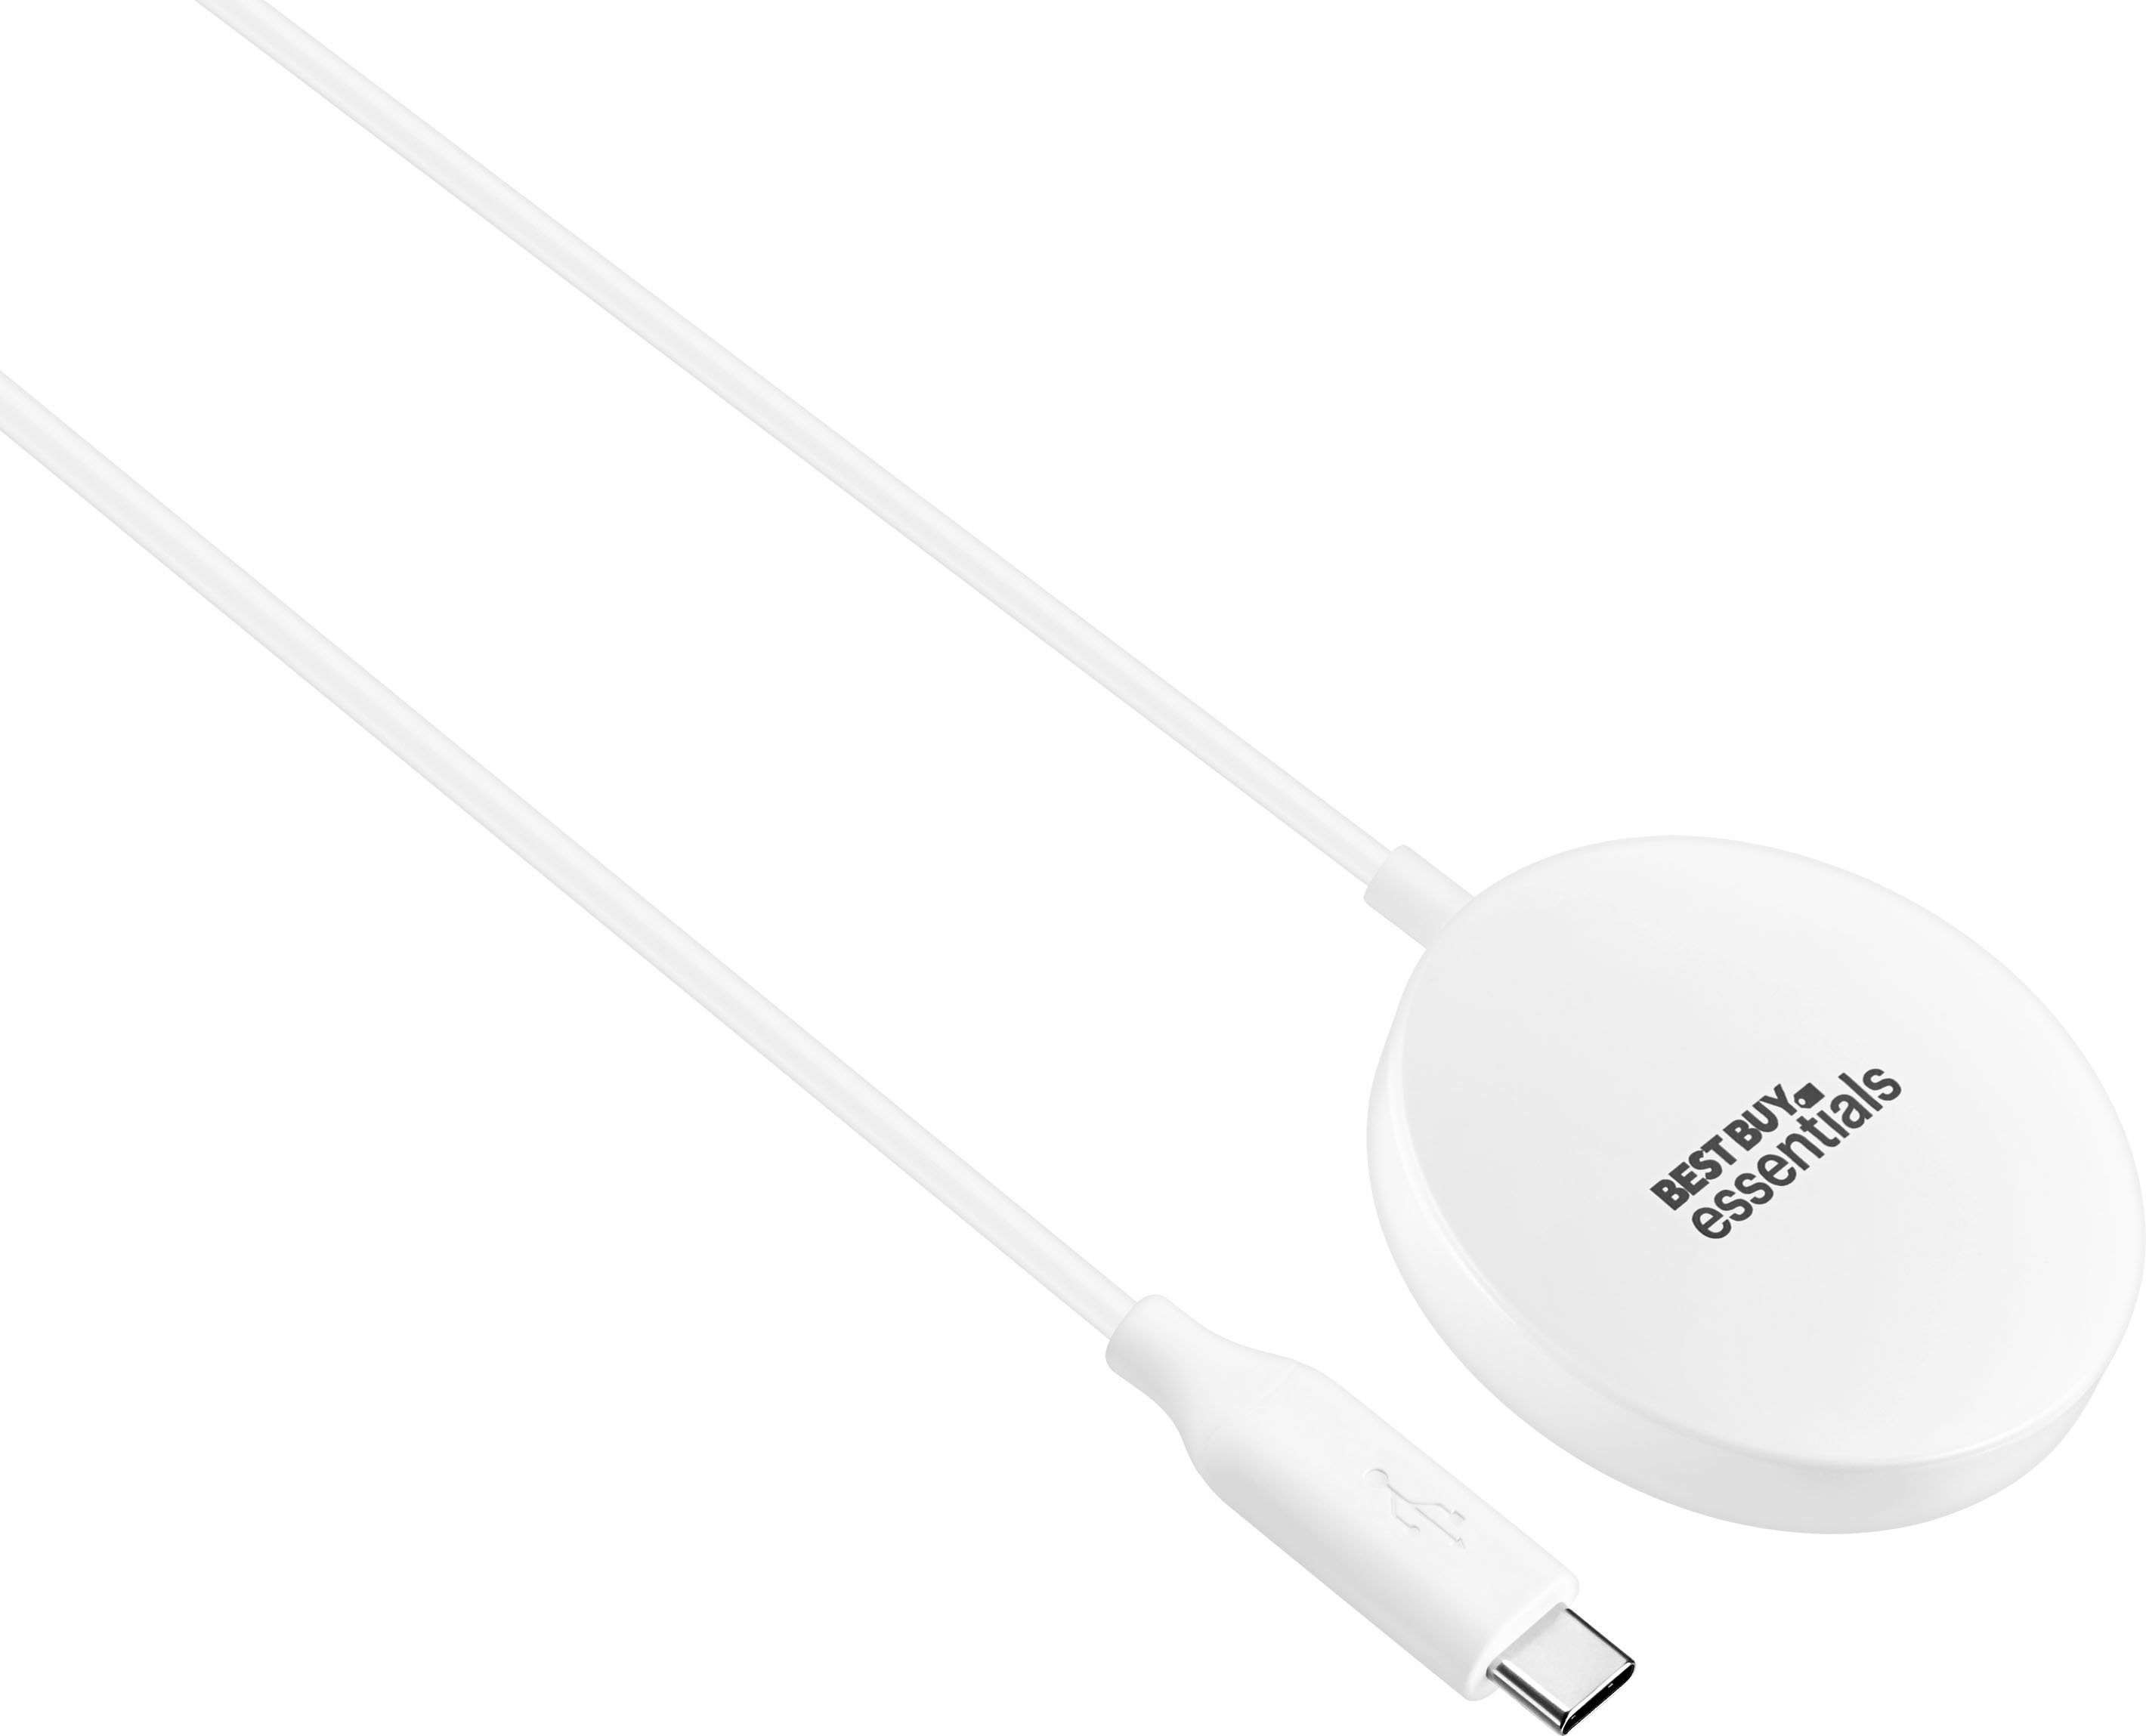 Best Buy essentials™ 2-in-1 15W Wireless Charger Kit with Watch Charger  Holder for iPhone, Samsung and More Qi Devices White BE-MQ215W24 - Best Buy